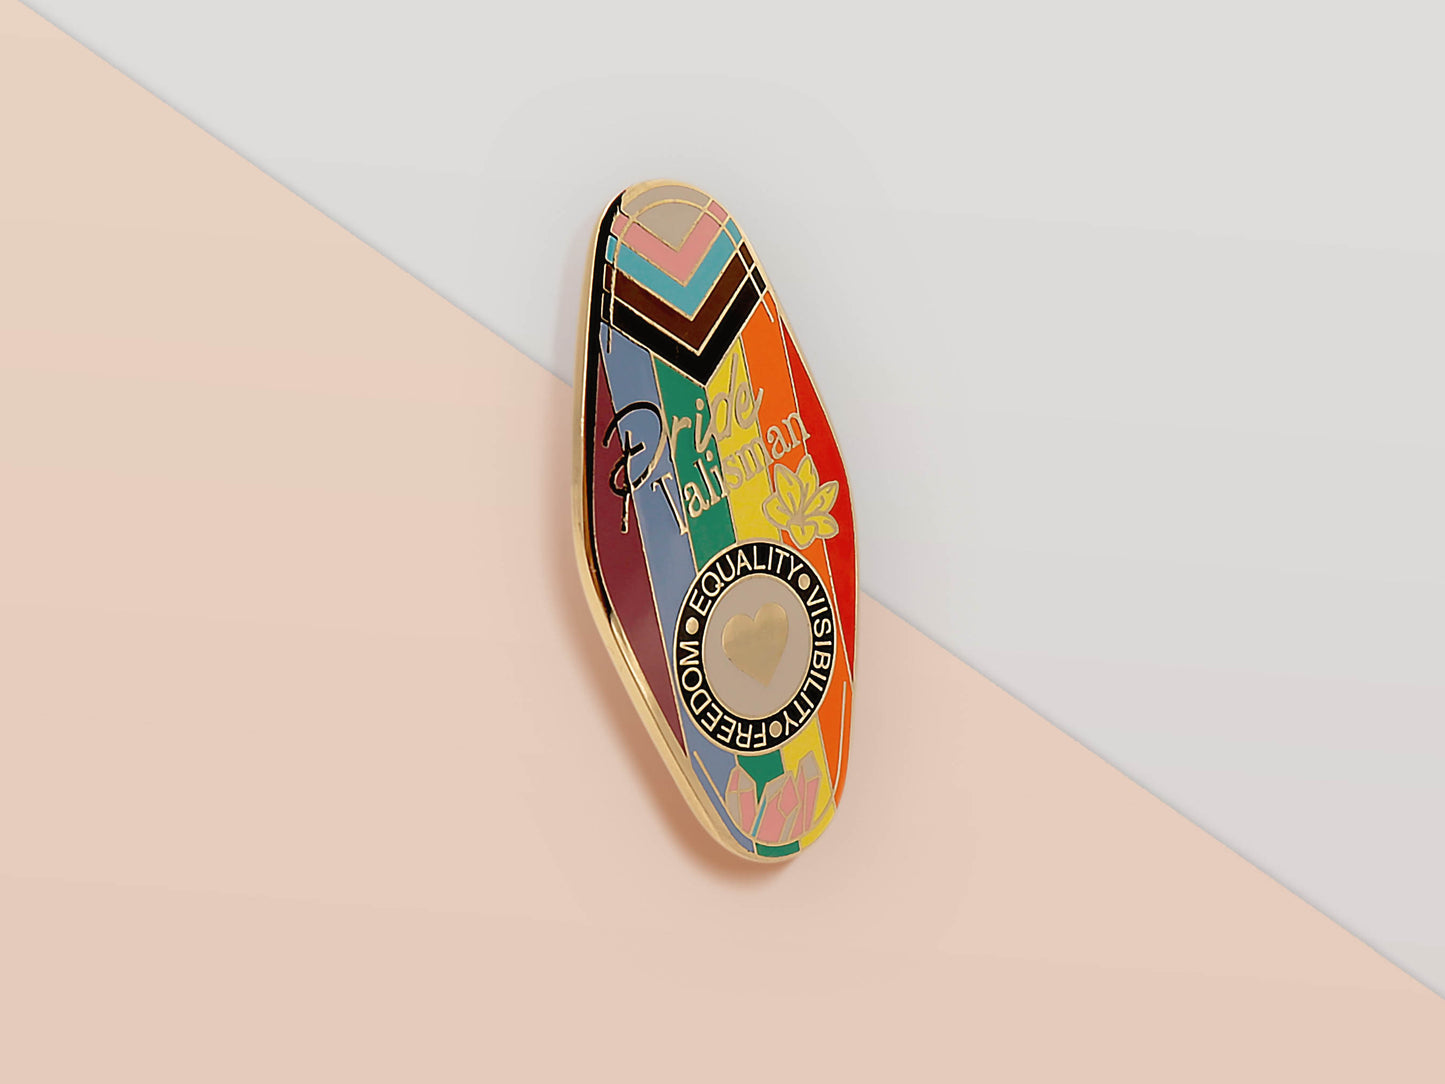 Gold Enamel Talisman Pin with progress pride flag design and the words Pride Talisman, Freedom Equality Visibility. The pins design includes a heart, flowers and crystals.